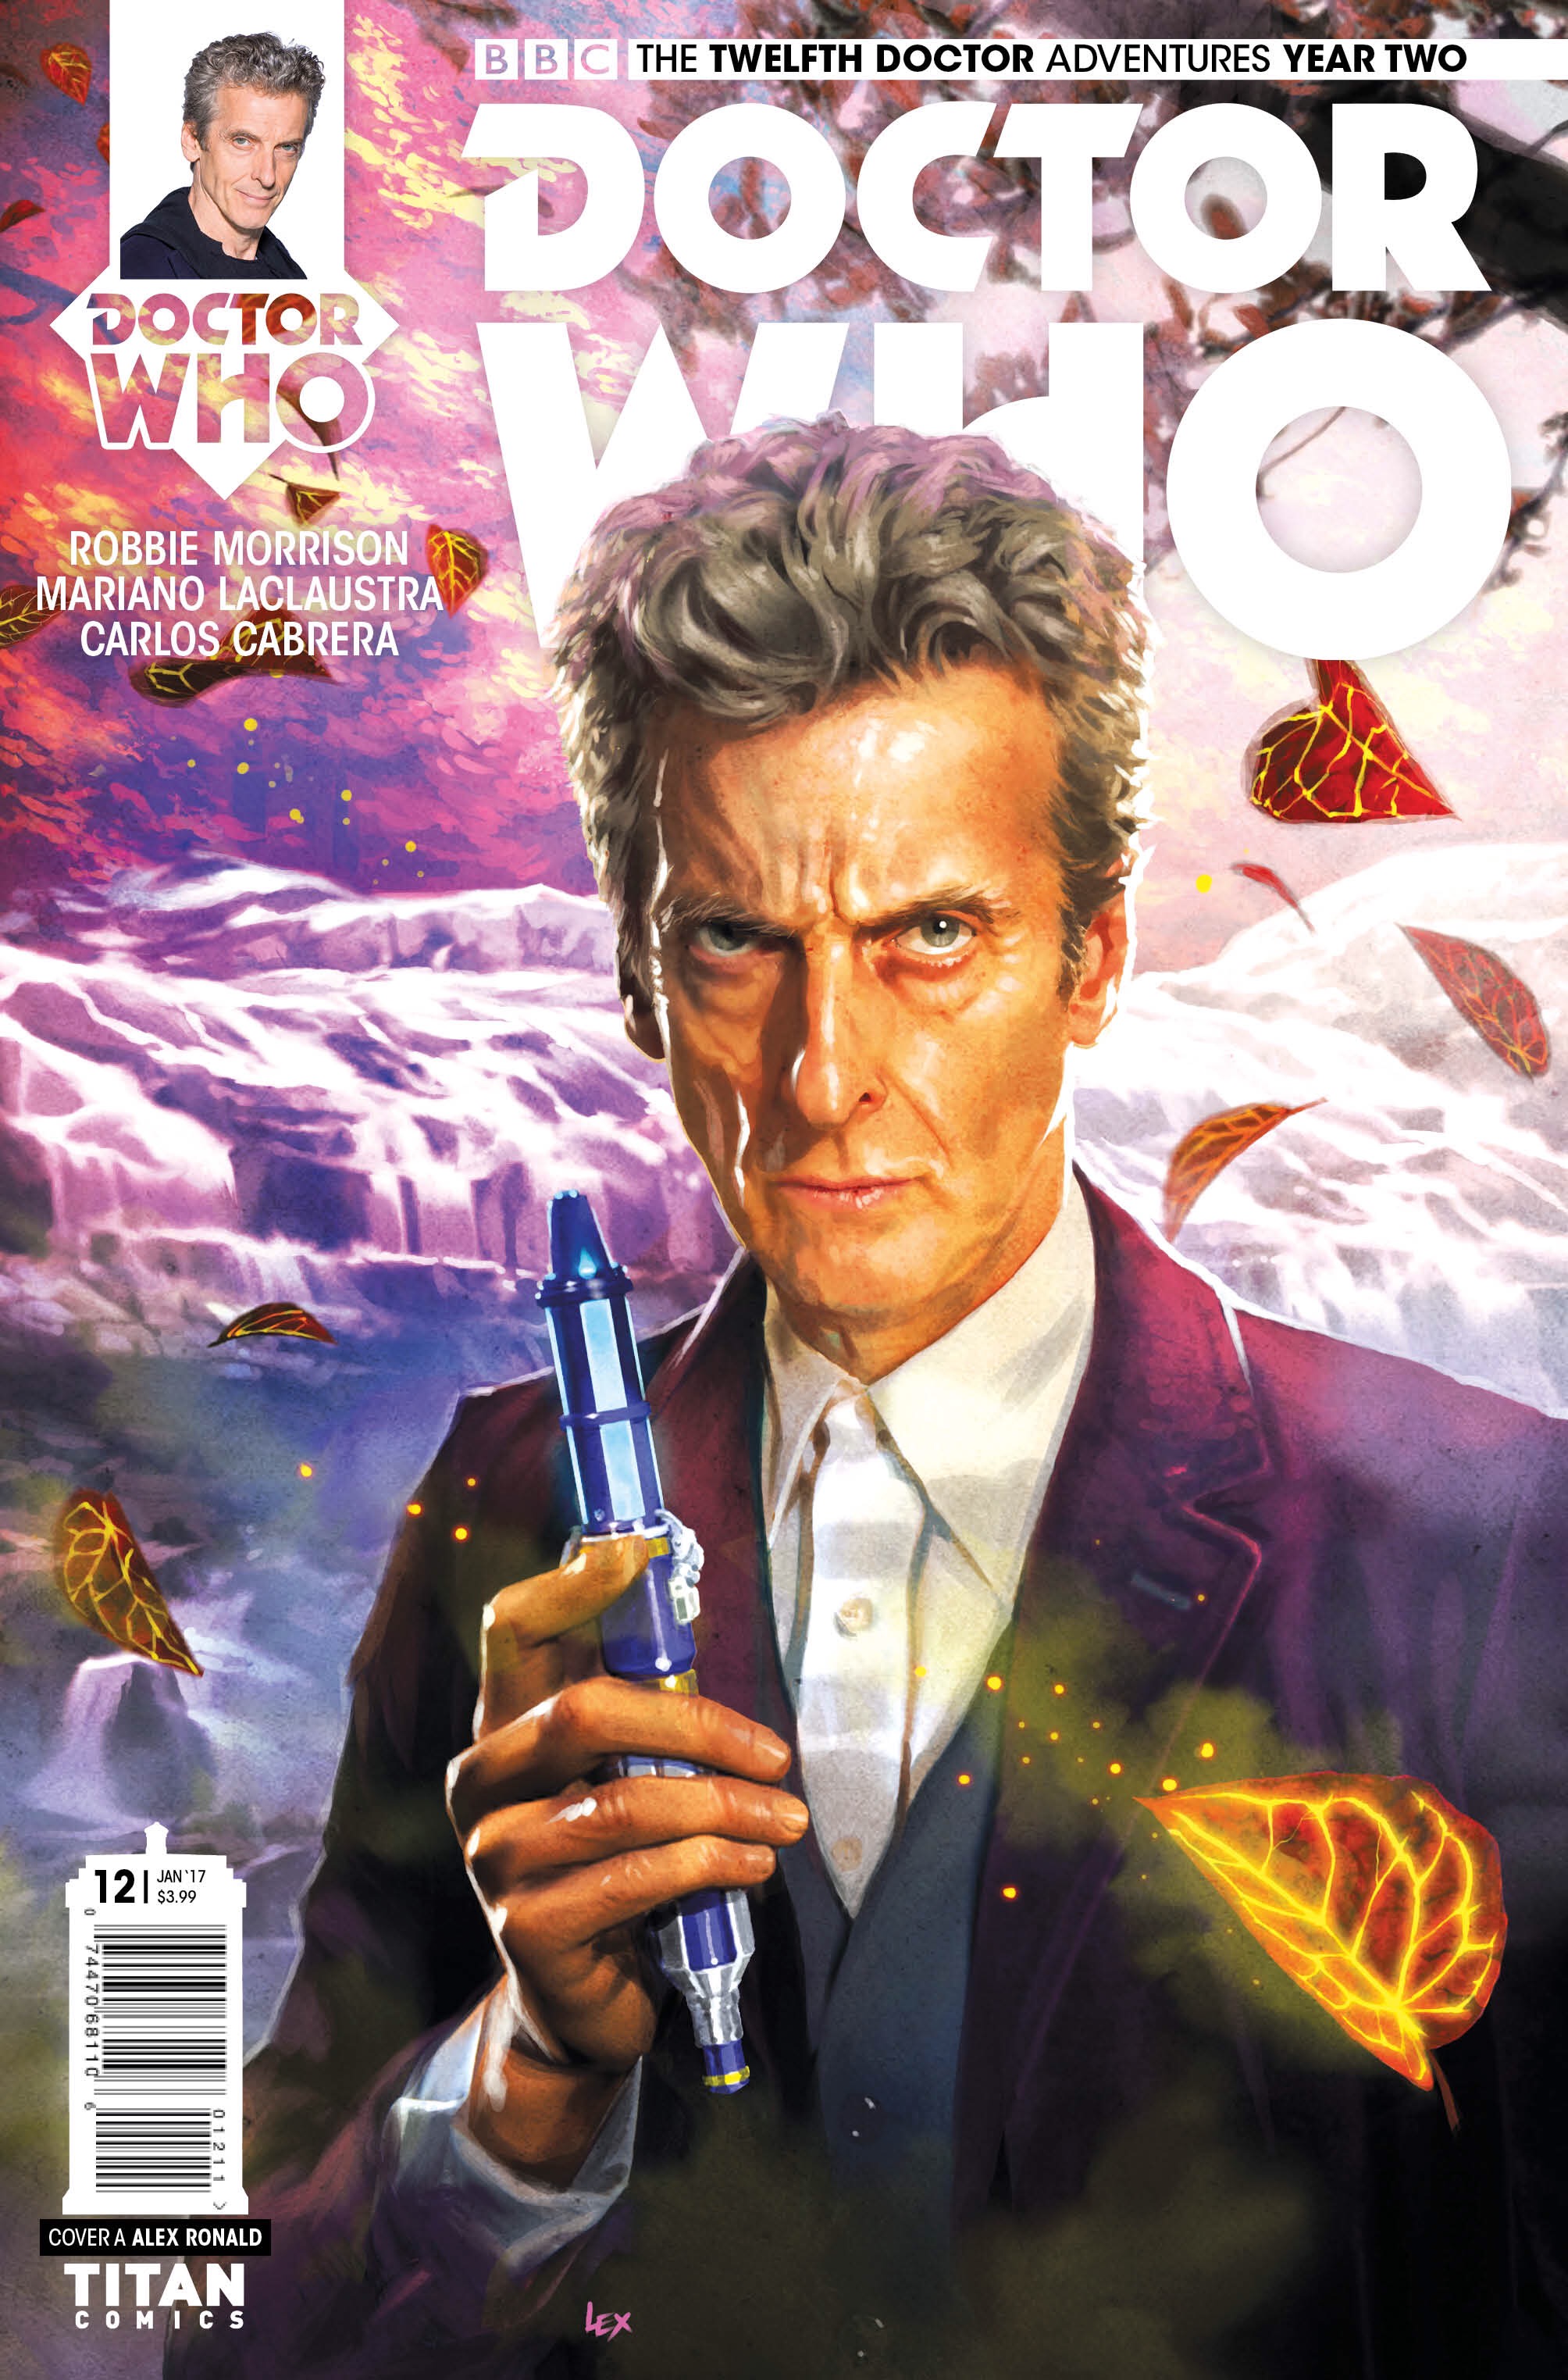 Doctor Who: The Twelfth Doctor Year Two #12 Cover A by Alex Ronald